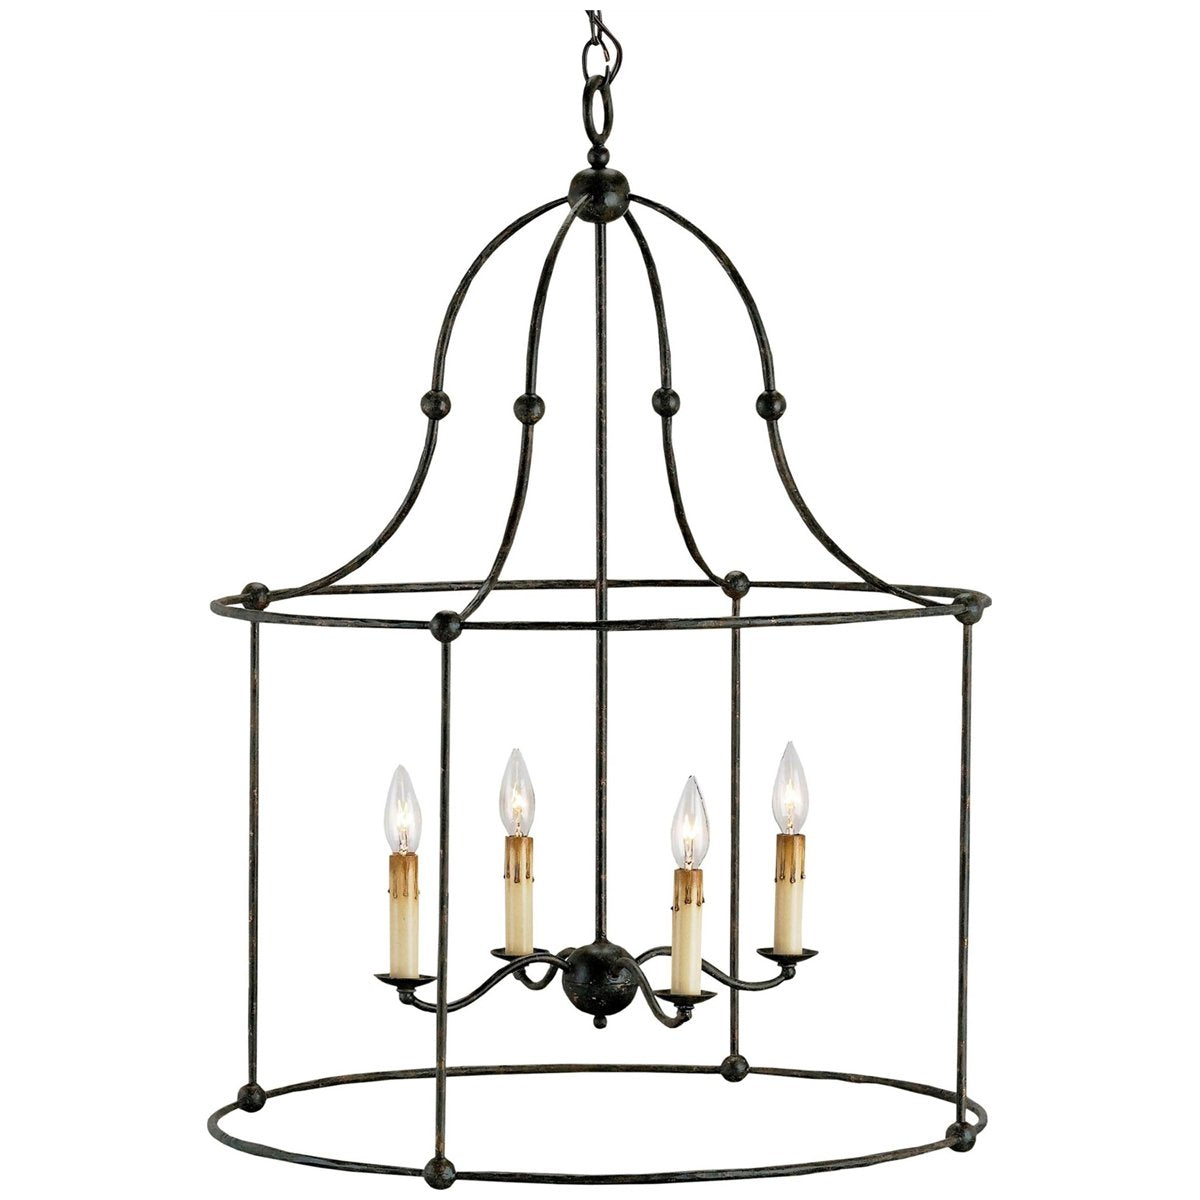 Currey and Company Fitzjames Black Large Lantern